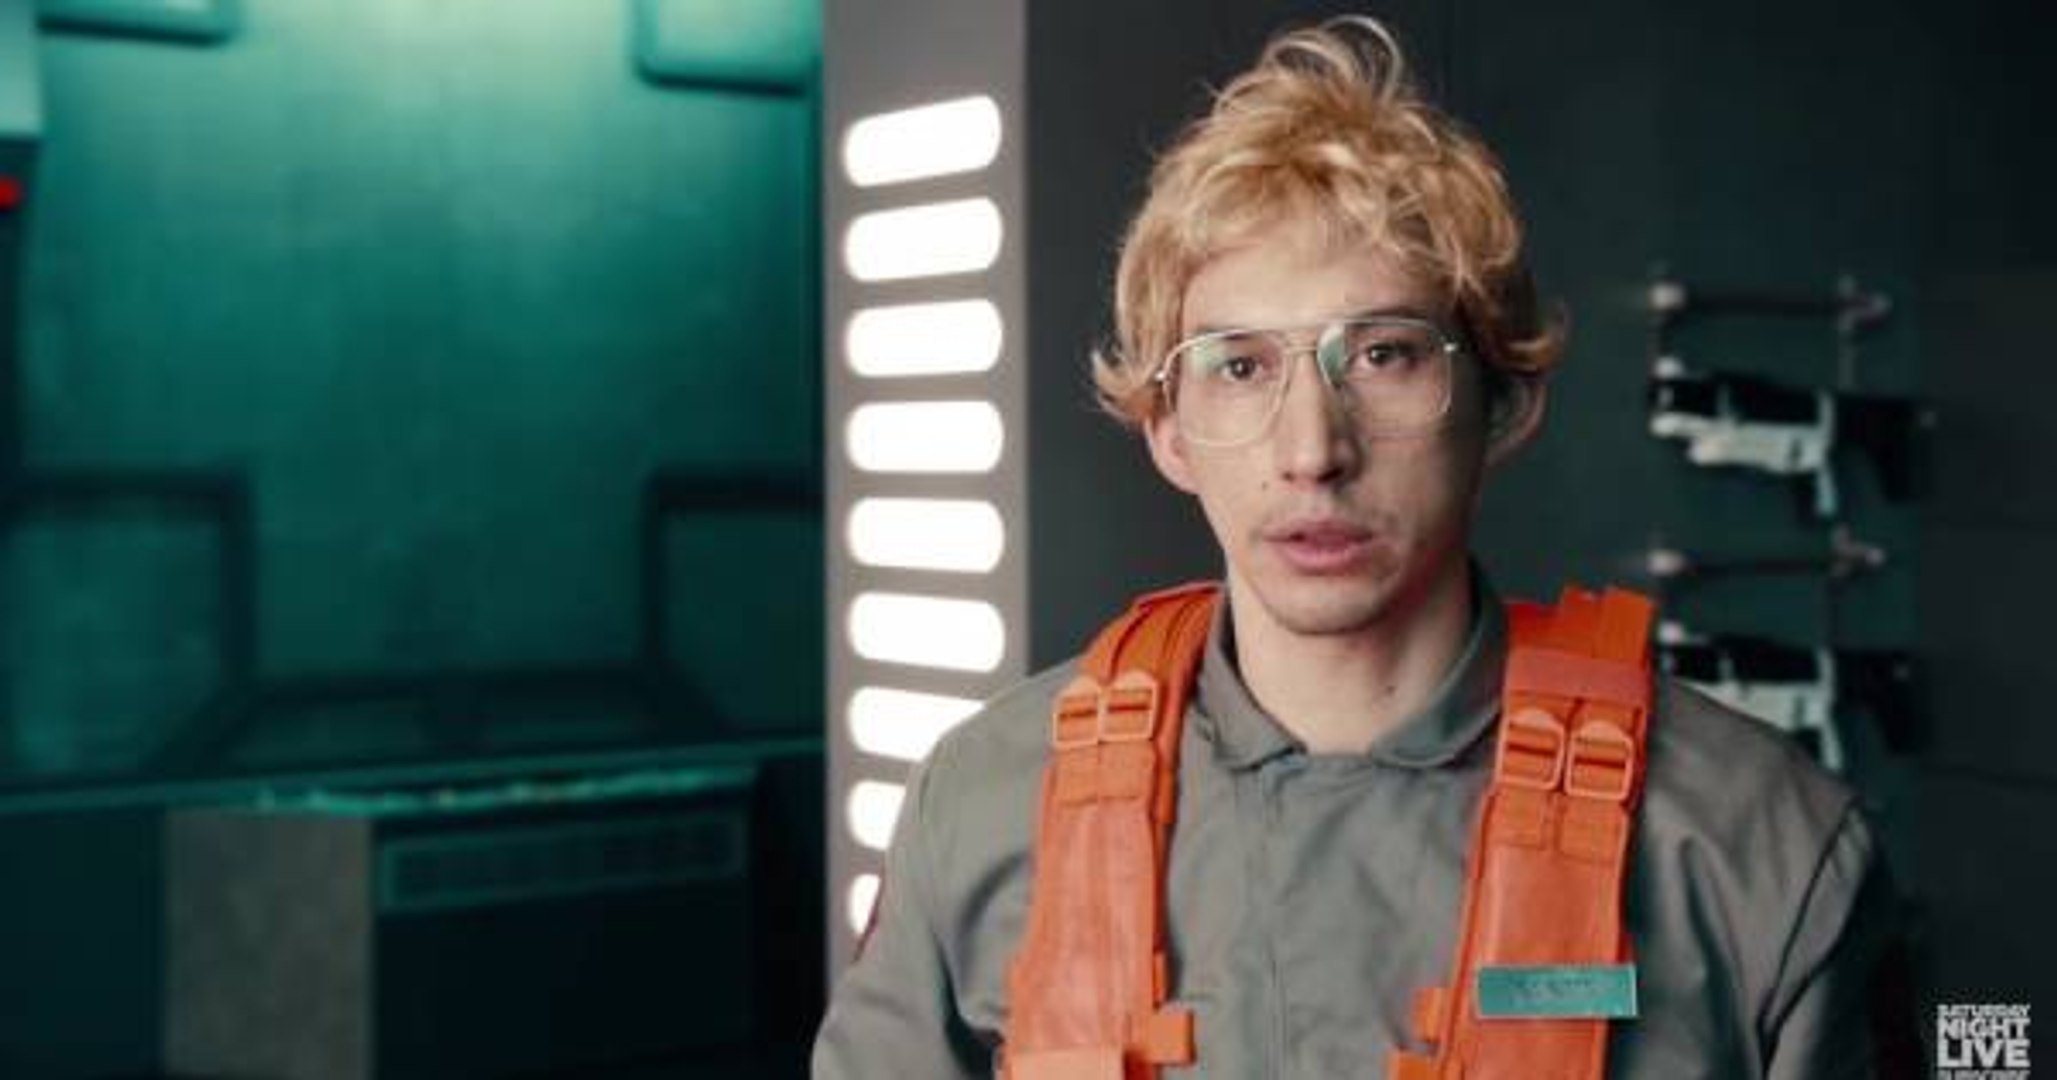 Wars Kylo in Undercover Boss. Awesome ! - Vidéo Dailymotion